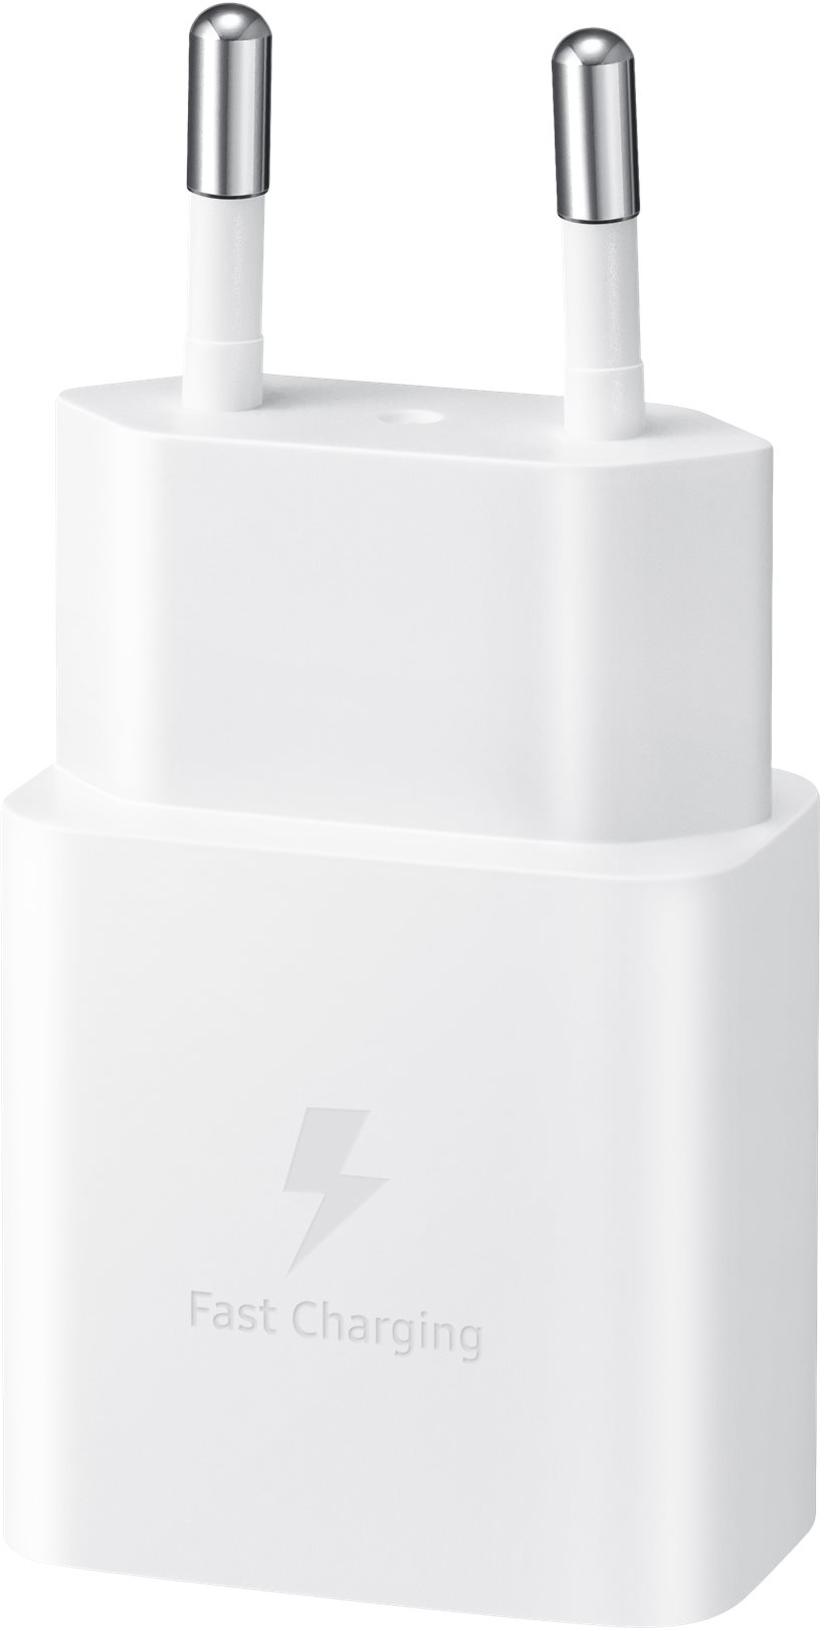 Samsung Wall Charger 15W + USB-C Cable Valkoinen 1m